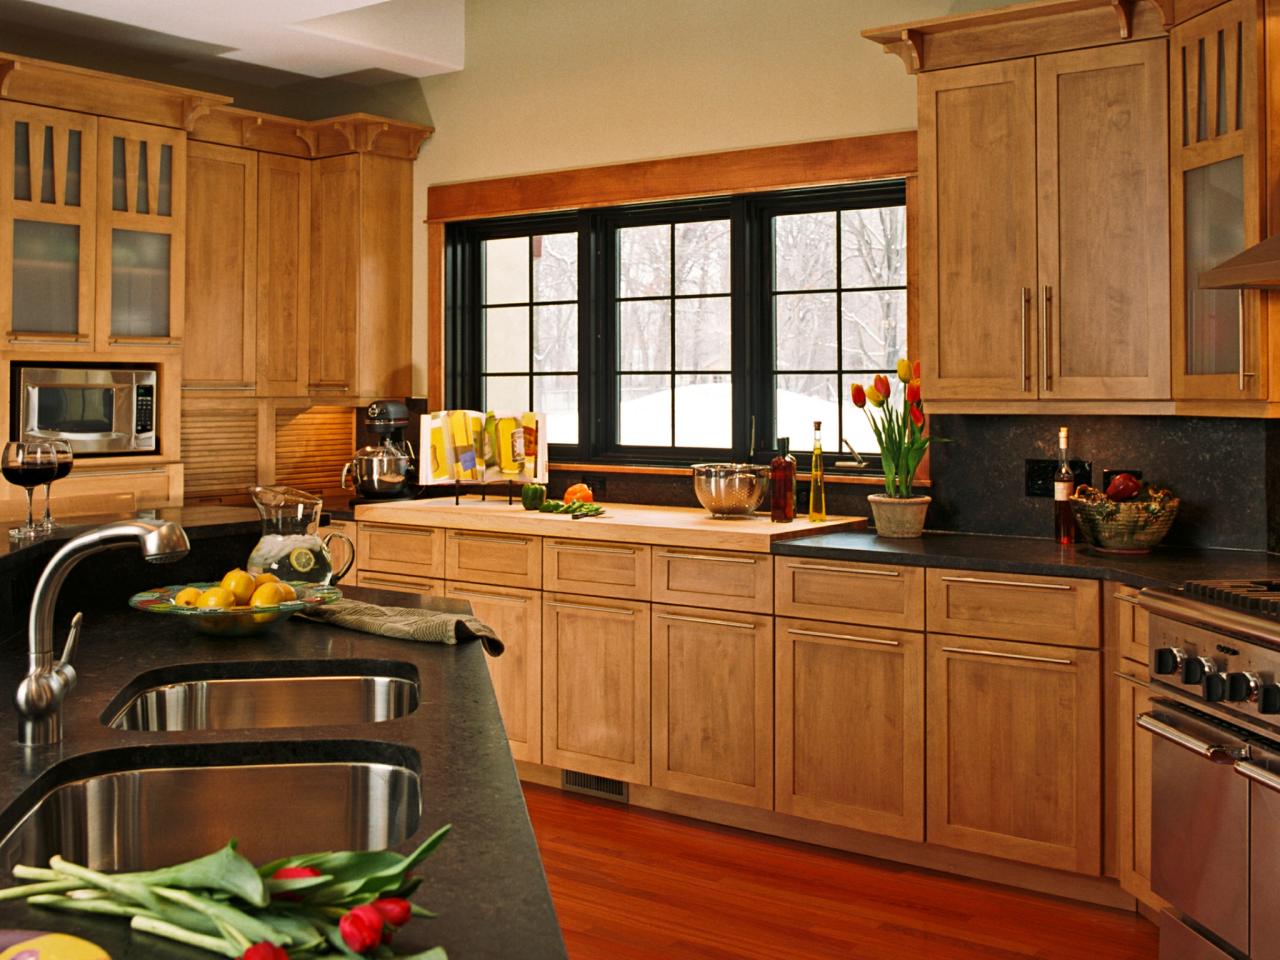 Stock Kitchen Cabinets Pictures Options Tips Ideas Hgtv